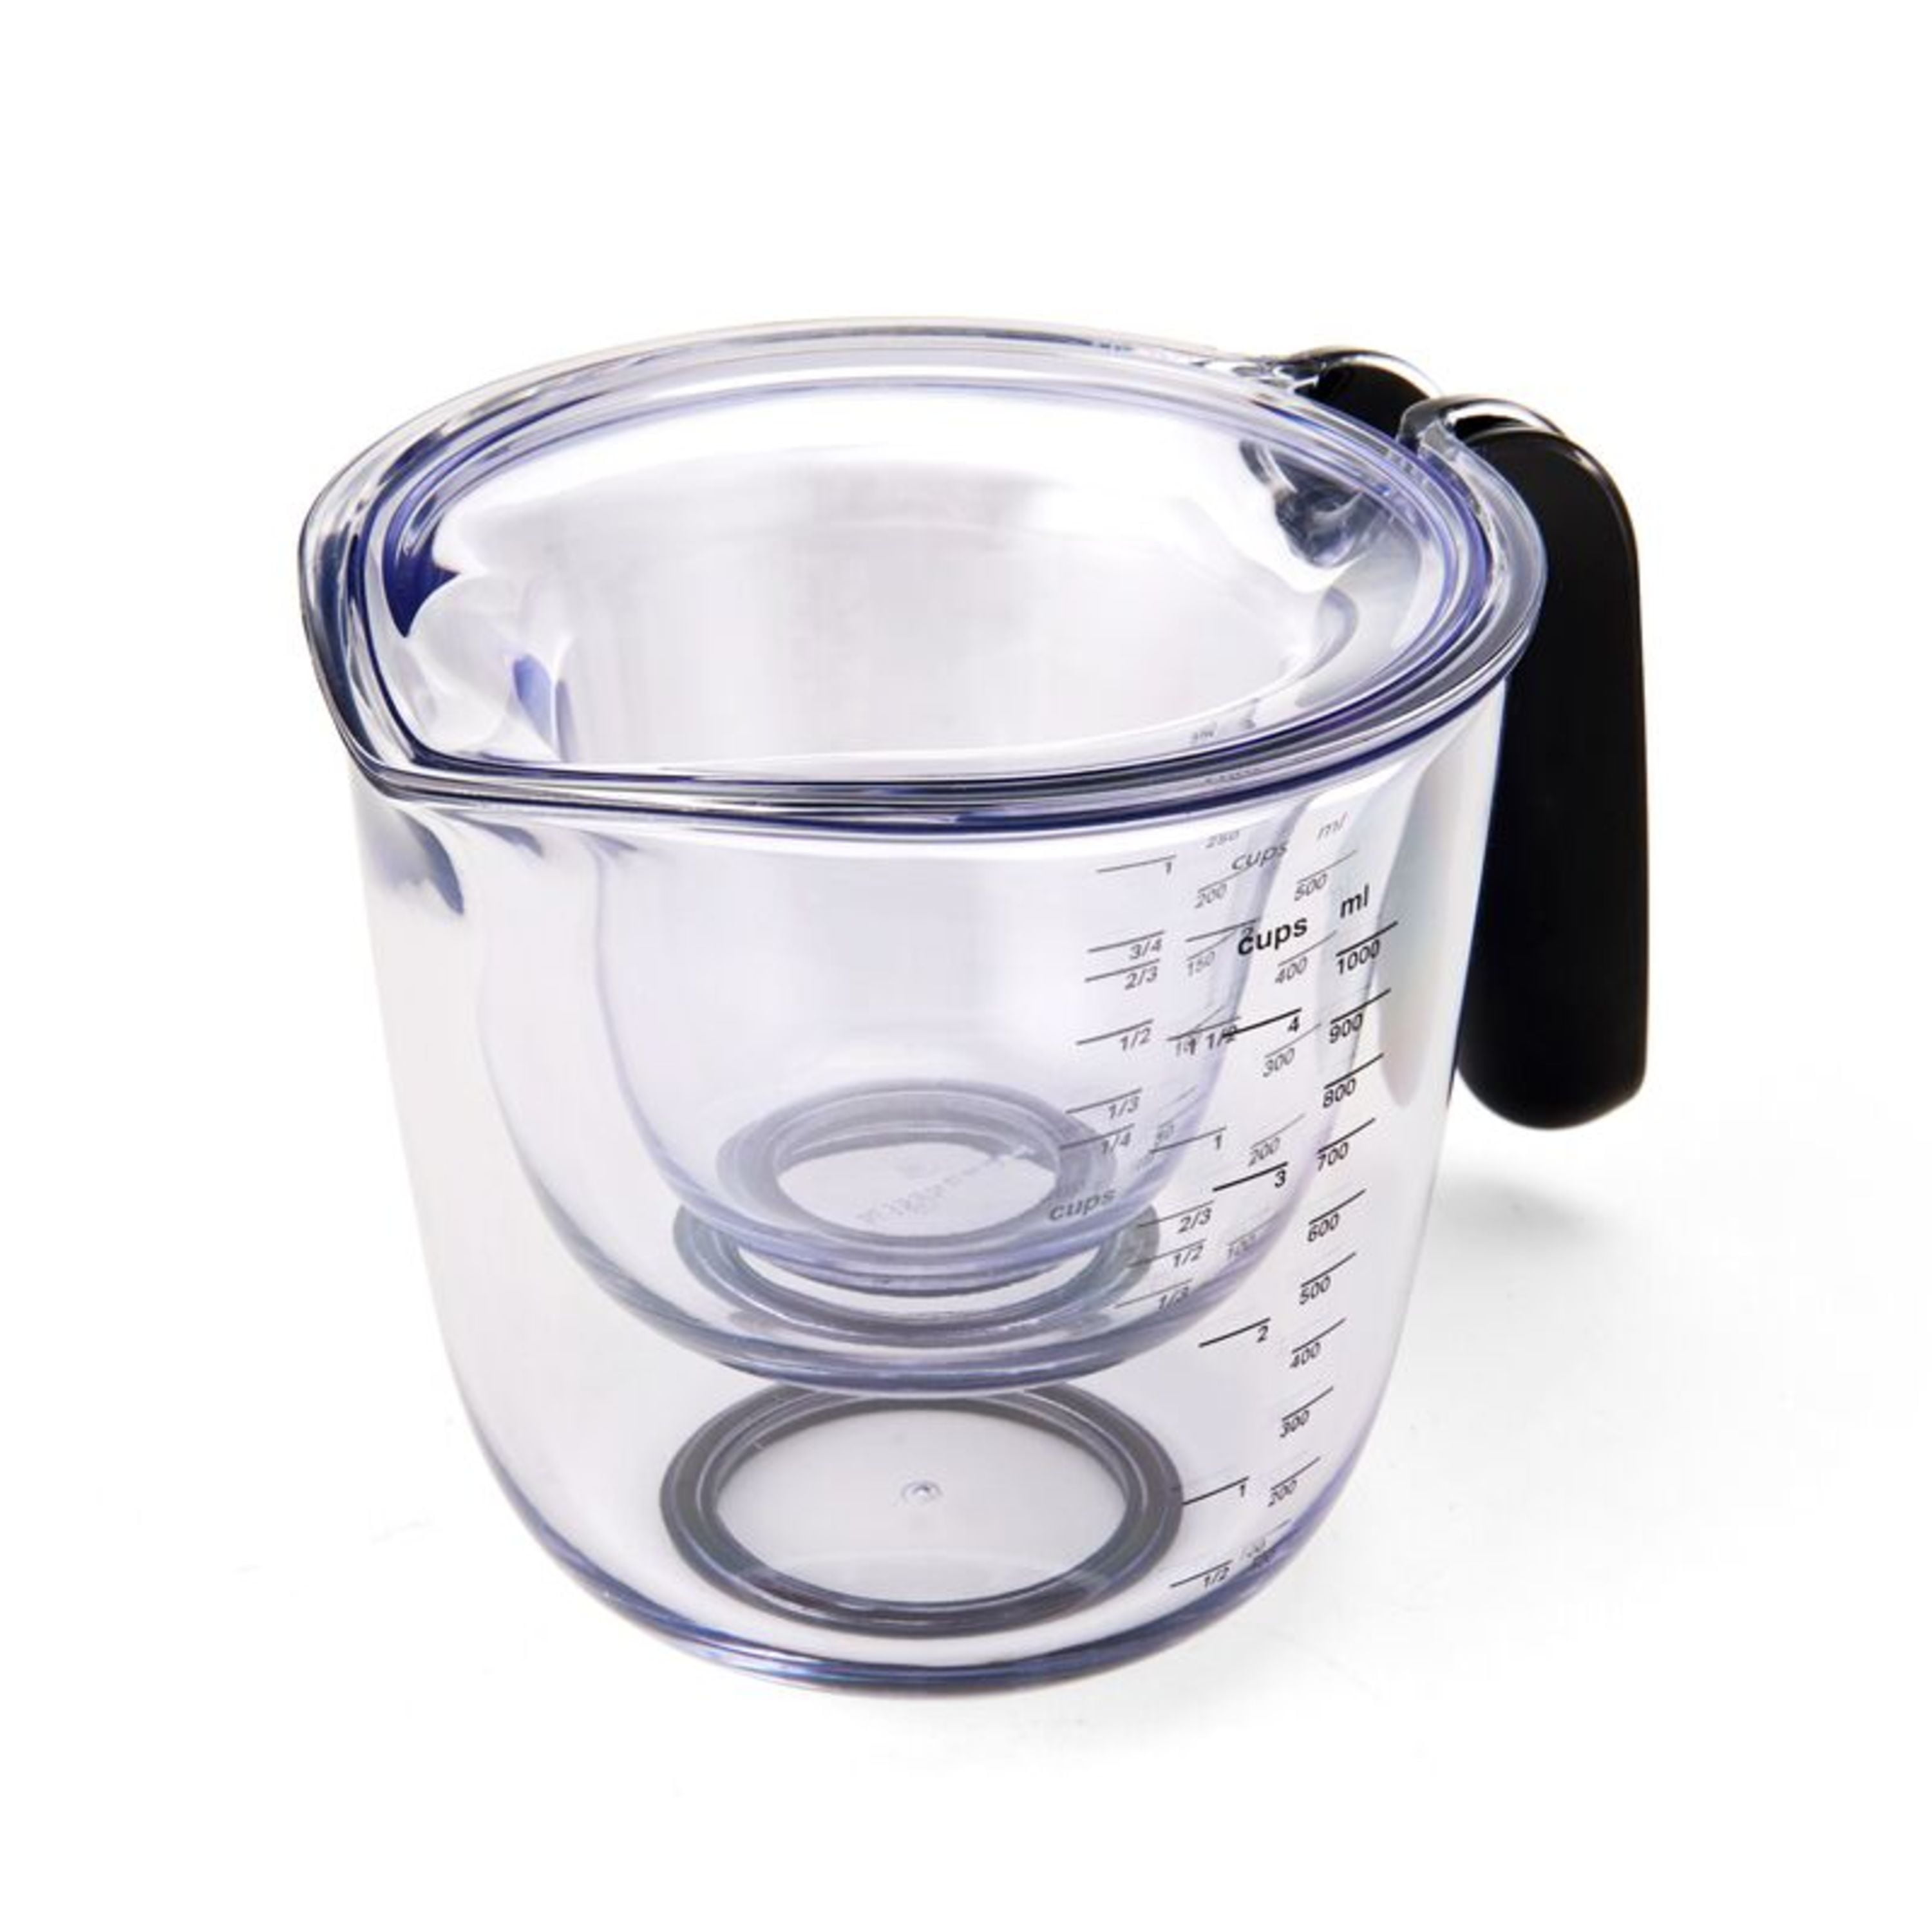  Measuring Cup Plastic Measure Cups - 3 Piece Liquid Measuring  Cup Set with Pitcher Handles, Clear Nesting Stackable measuring cups for  Kitchen, Multiple Measurement Scales,Dishwasher Safe: Home & Kitchen